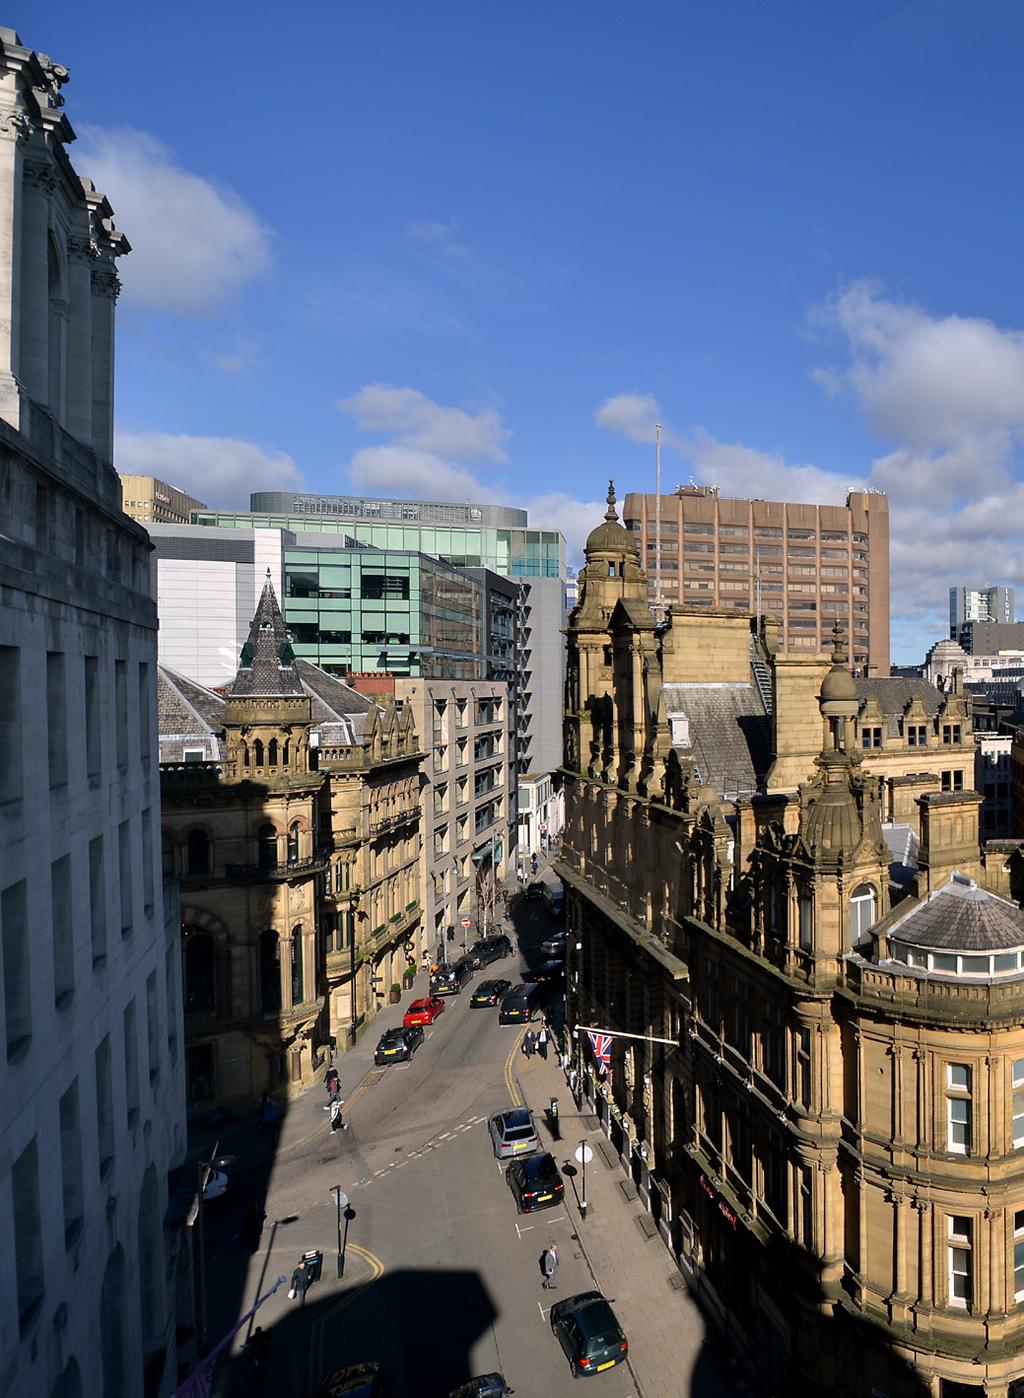 A CITY FULL OF CULTURE & HERITAGE MANCHESTER LIFESTYLE Manchester has established itself as the business capital of the